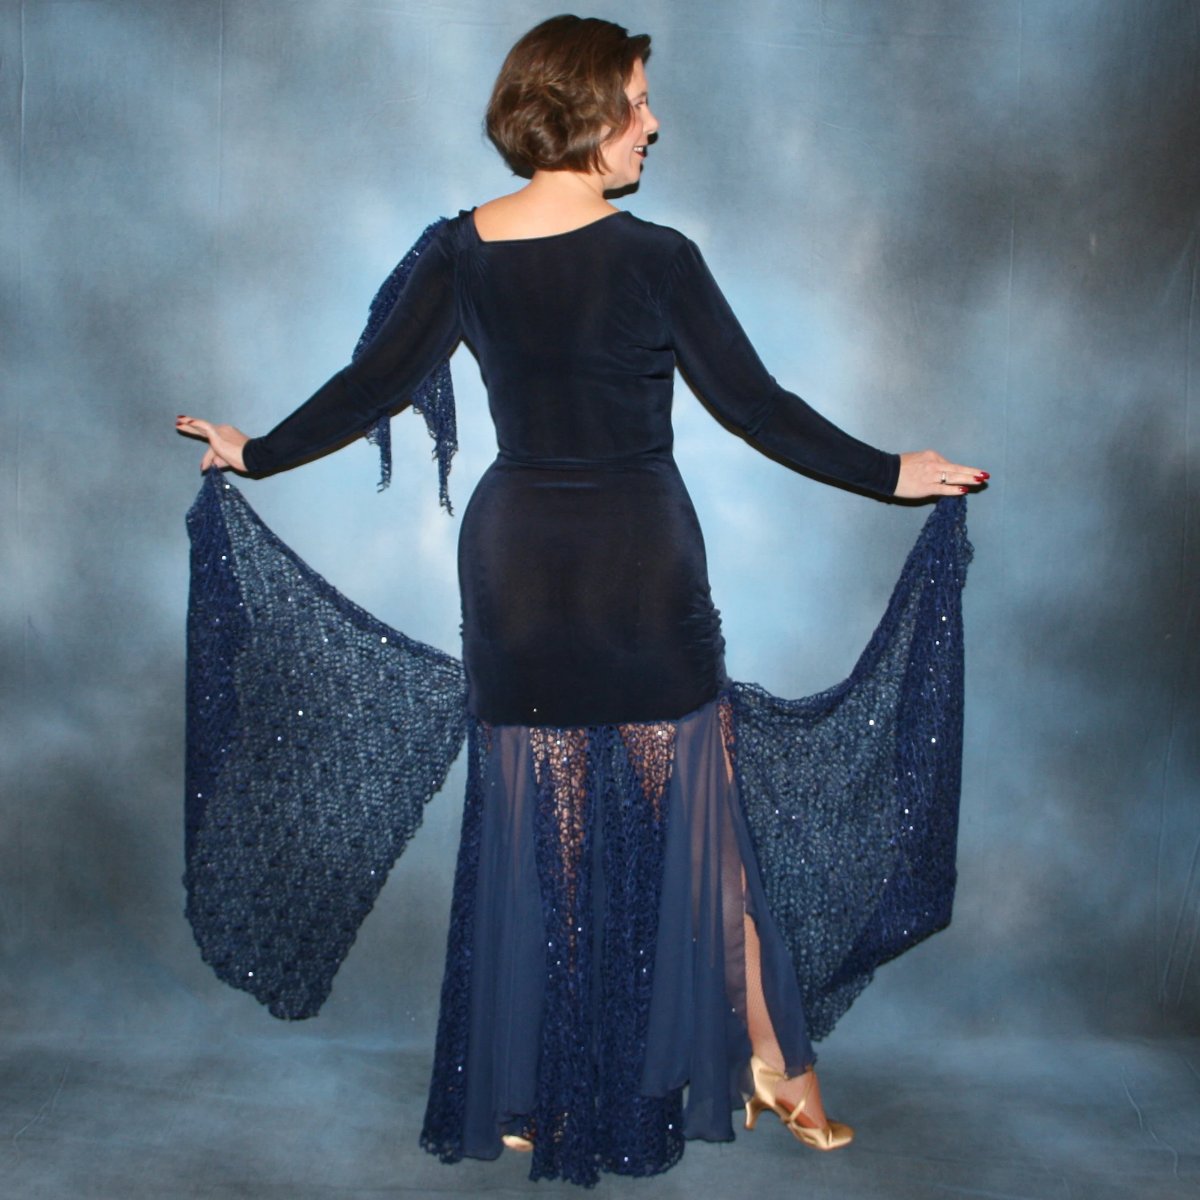 Crystal's Creations back view of Ballroom dress created in luxurious navy blue solid slinky fabric with yards of gorgeous unique sequined mermaid net look lace & chiffon. The bottom of base of dress has ruching at the hip. A great social dress for any ballroom dance or special occasion, as well as a great beginner show dress!